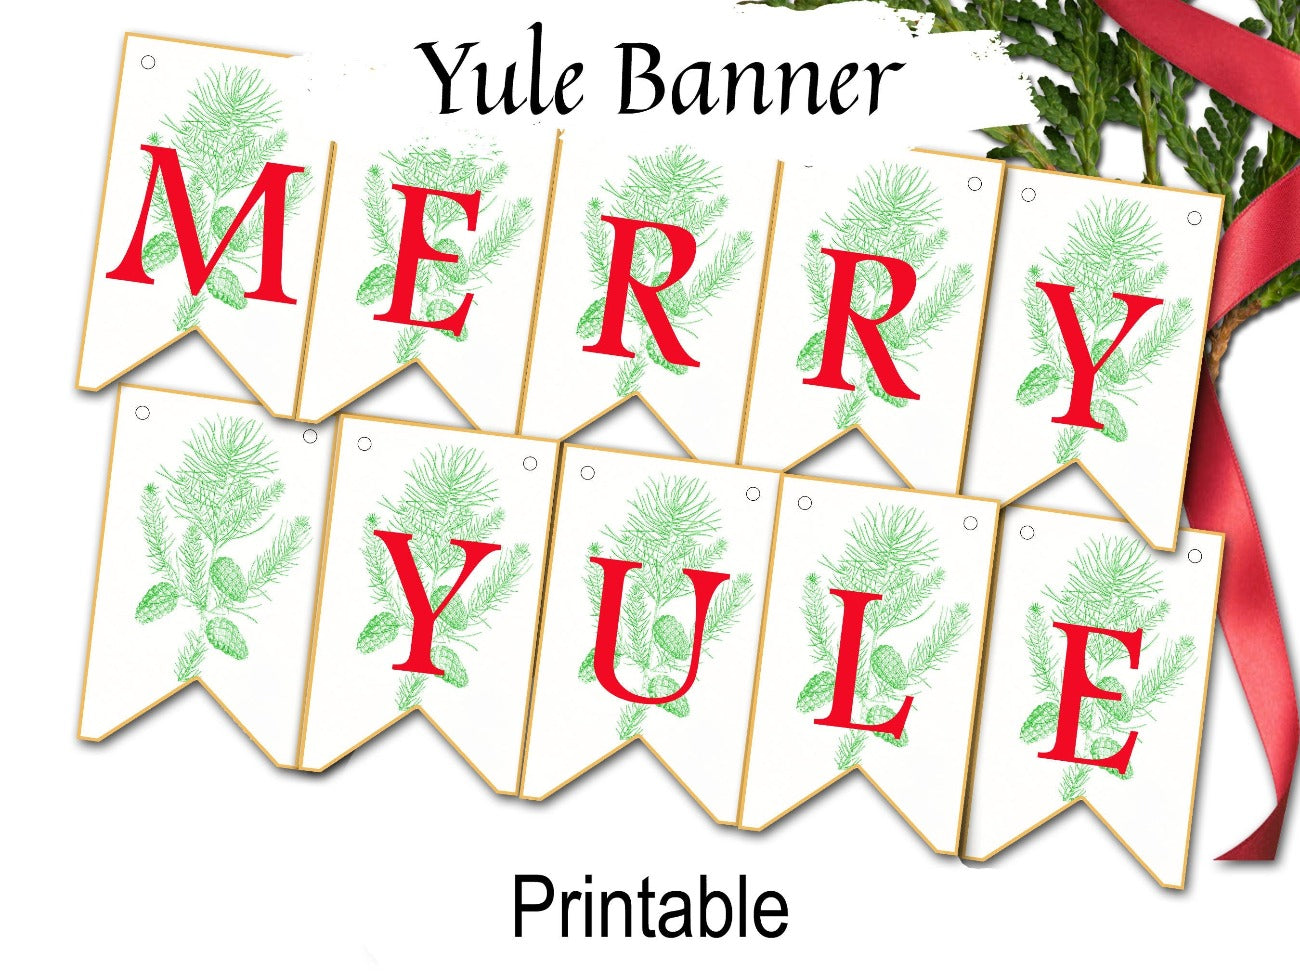 MERRY YULE BANNER, Pagan Altar Garland Decoration, Wicca Sabbat Festival Celebration Bunting, 10 Printable Flags for Winter Solstice - Morgana Magick Spell